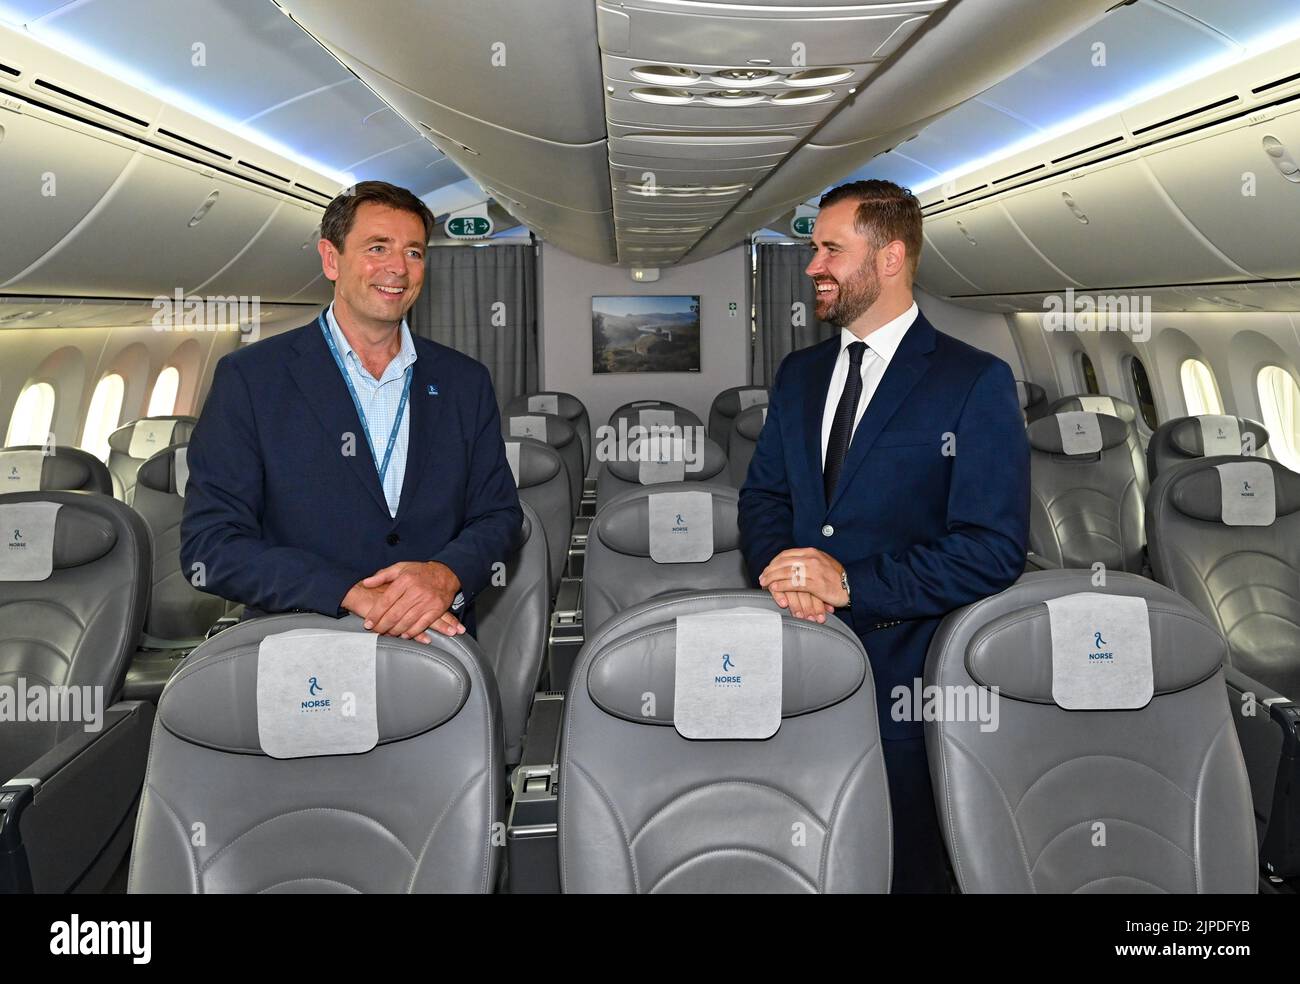 17 August 2022, Brandenburg, Schönefeld: Björn Tore Larsen (l), CEO of Norse Atlantic Airways, and Thomas Hoff Andersson, Managing Director for Airport Operations at BER, stand in a Boeing 787 Dreamliner before the first flight from the capital's airport BER to New York (JFK). The airline Norse Atlantic Airways will launch its first flight from BER Airport to New York (JFK) on August 17. Photo: Patrick Pleul/dpa Stock Photo